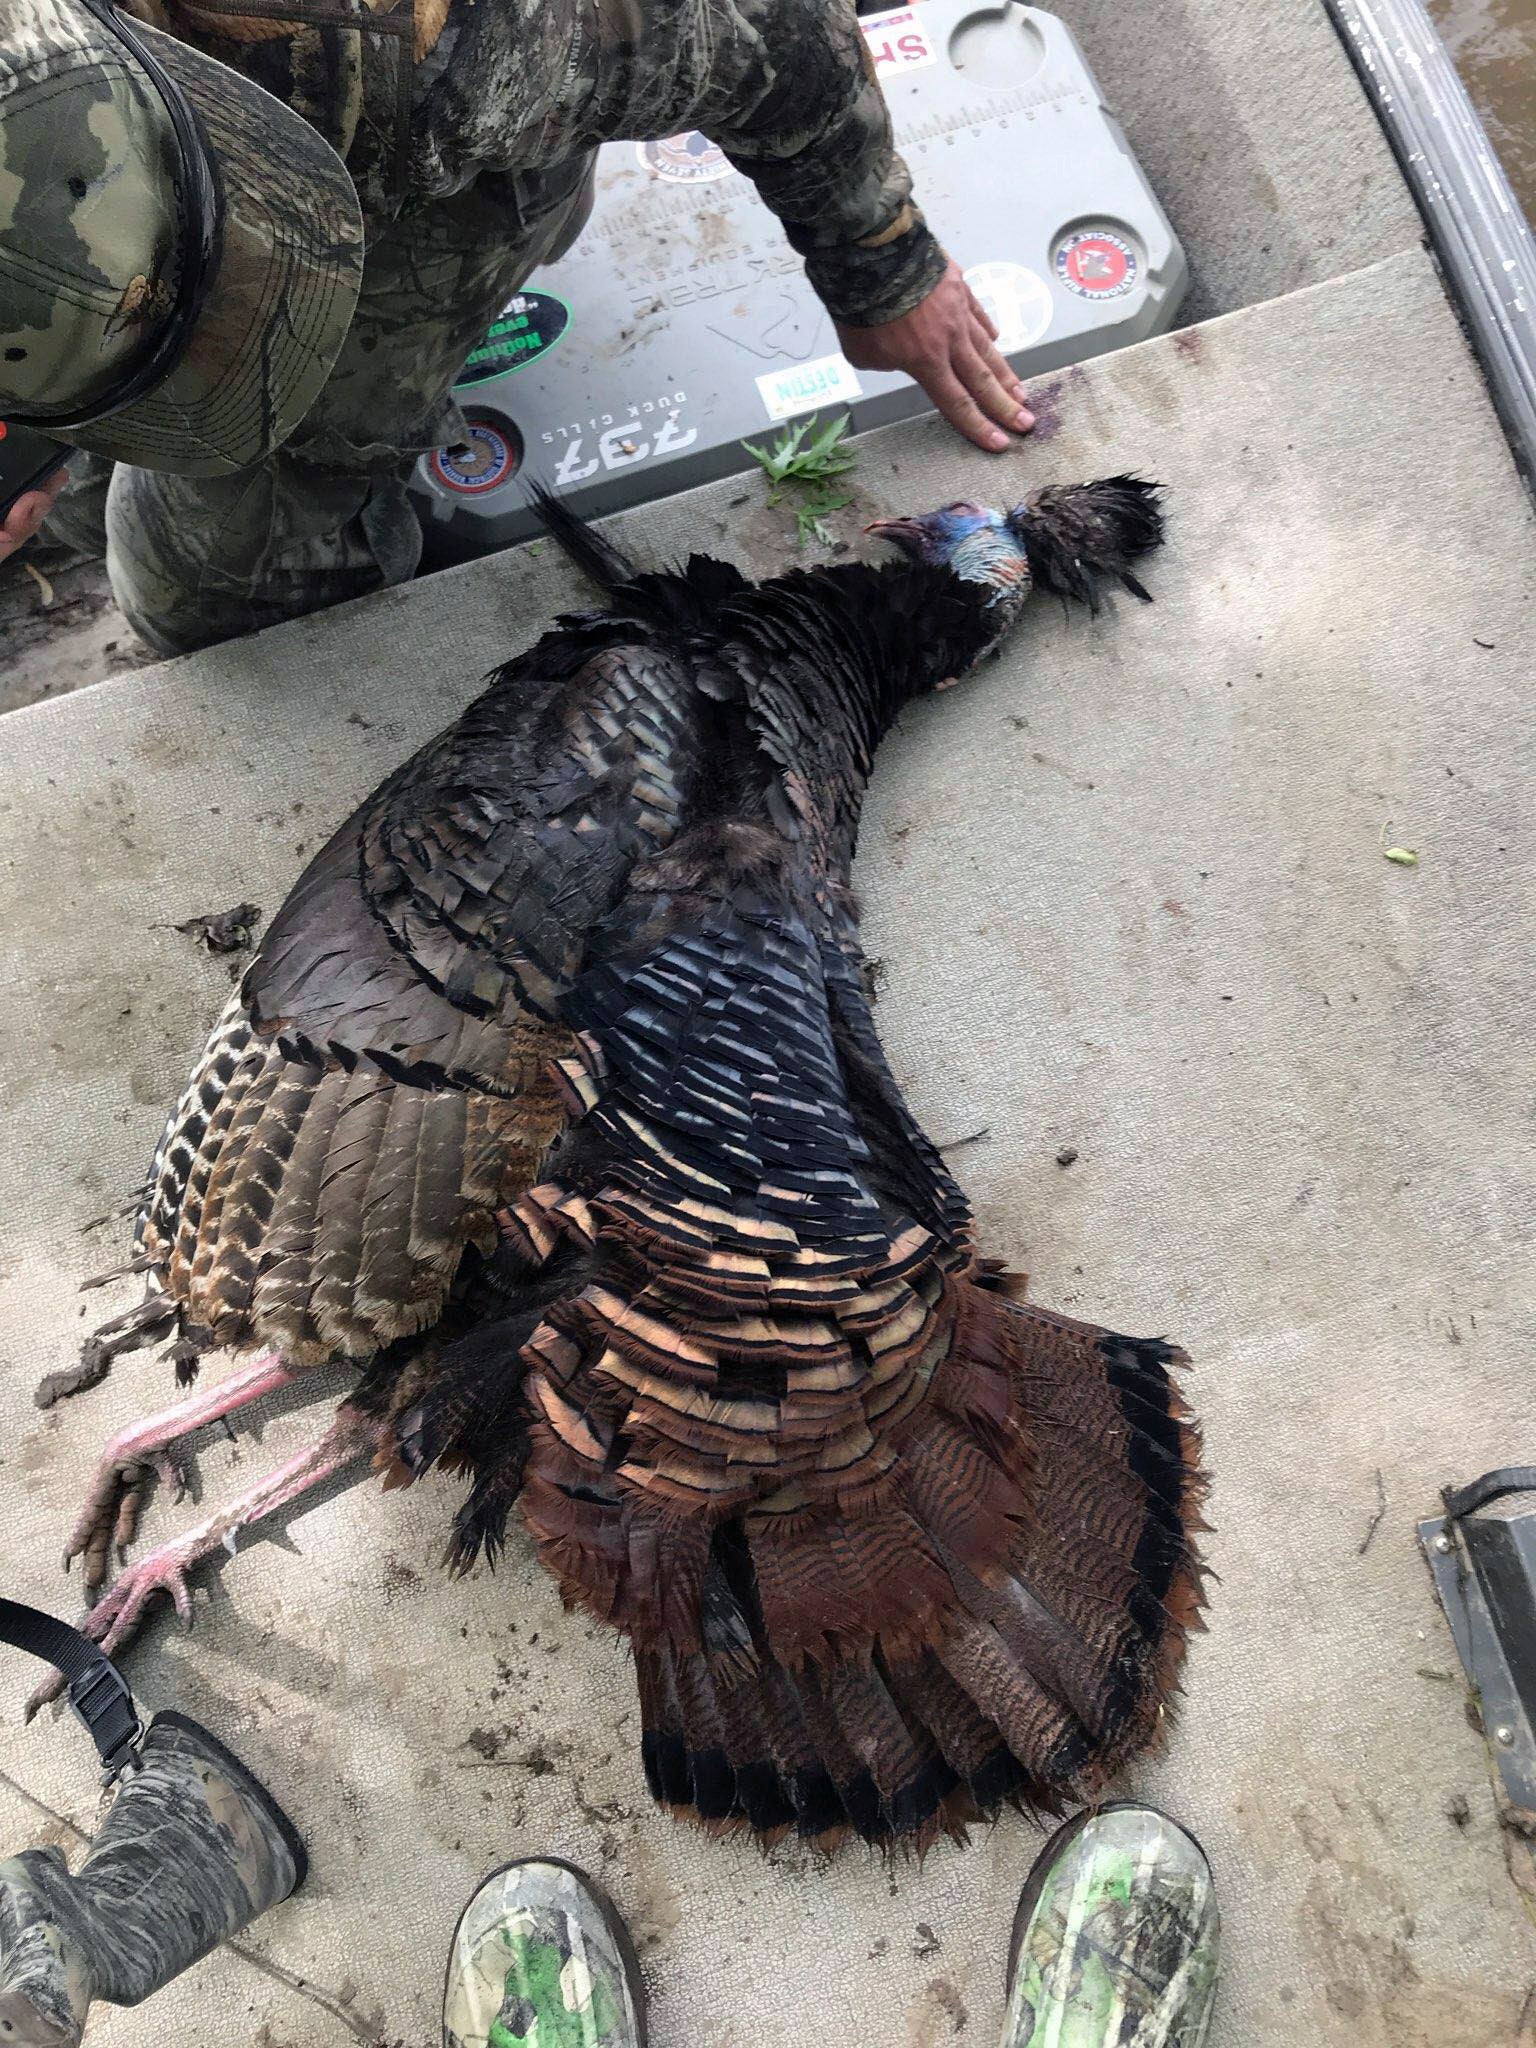 The weird gobbler weighed a bit more than 21 pounds and its spurs were more than one inch long.